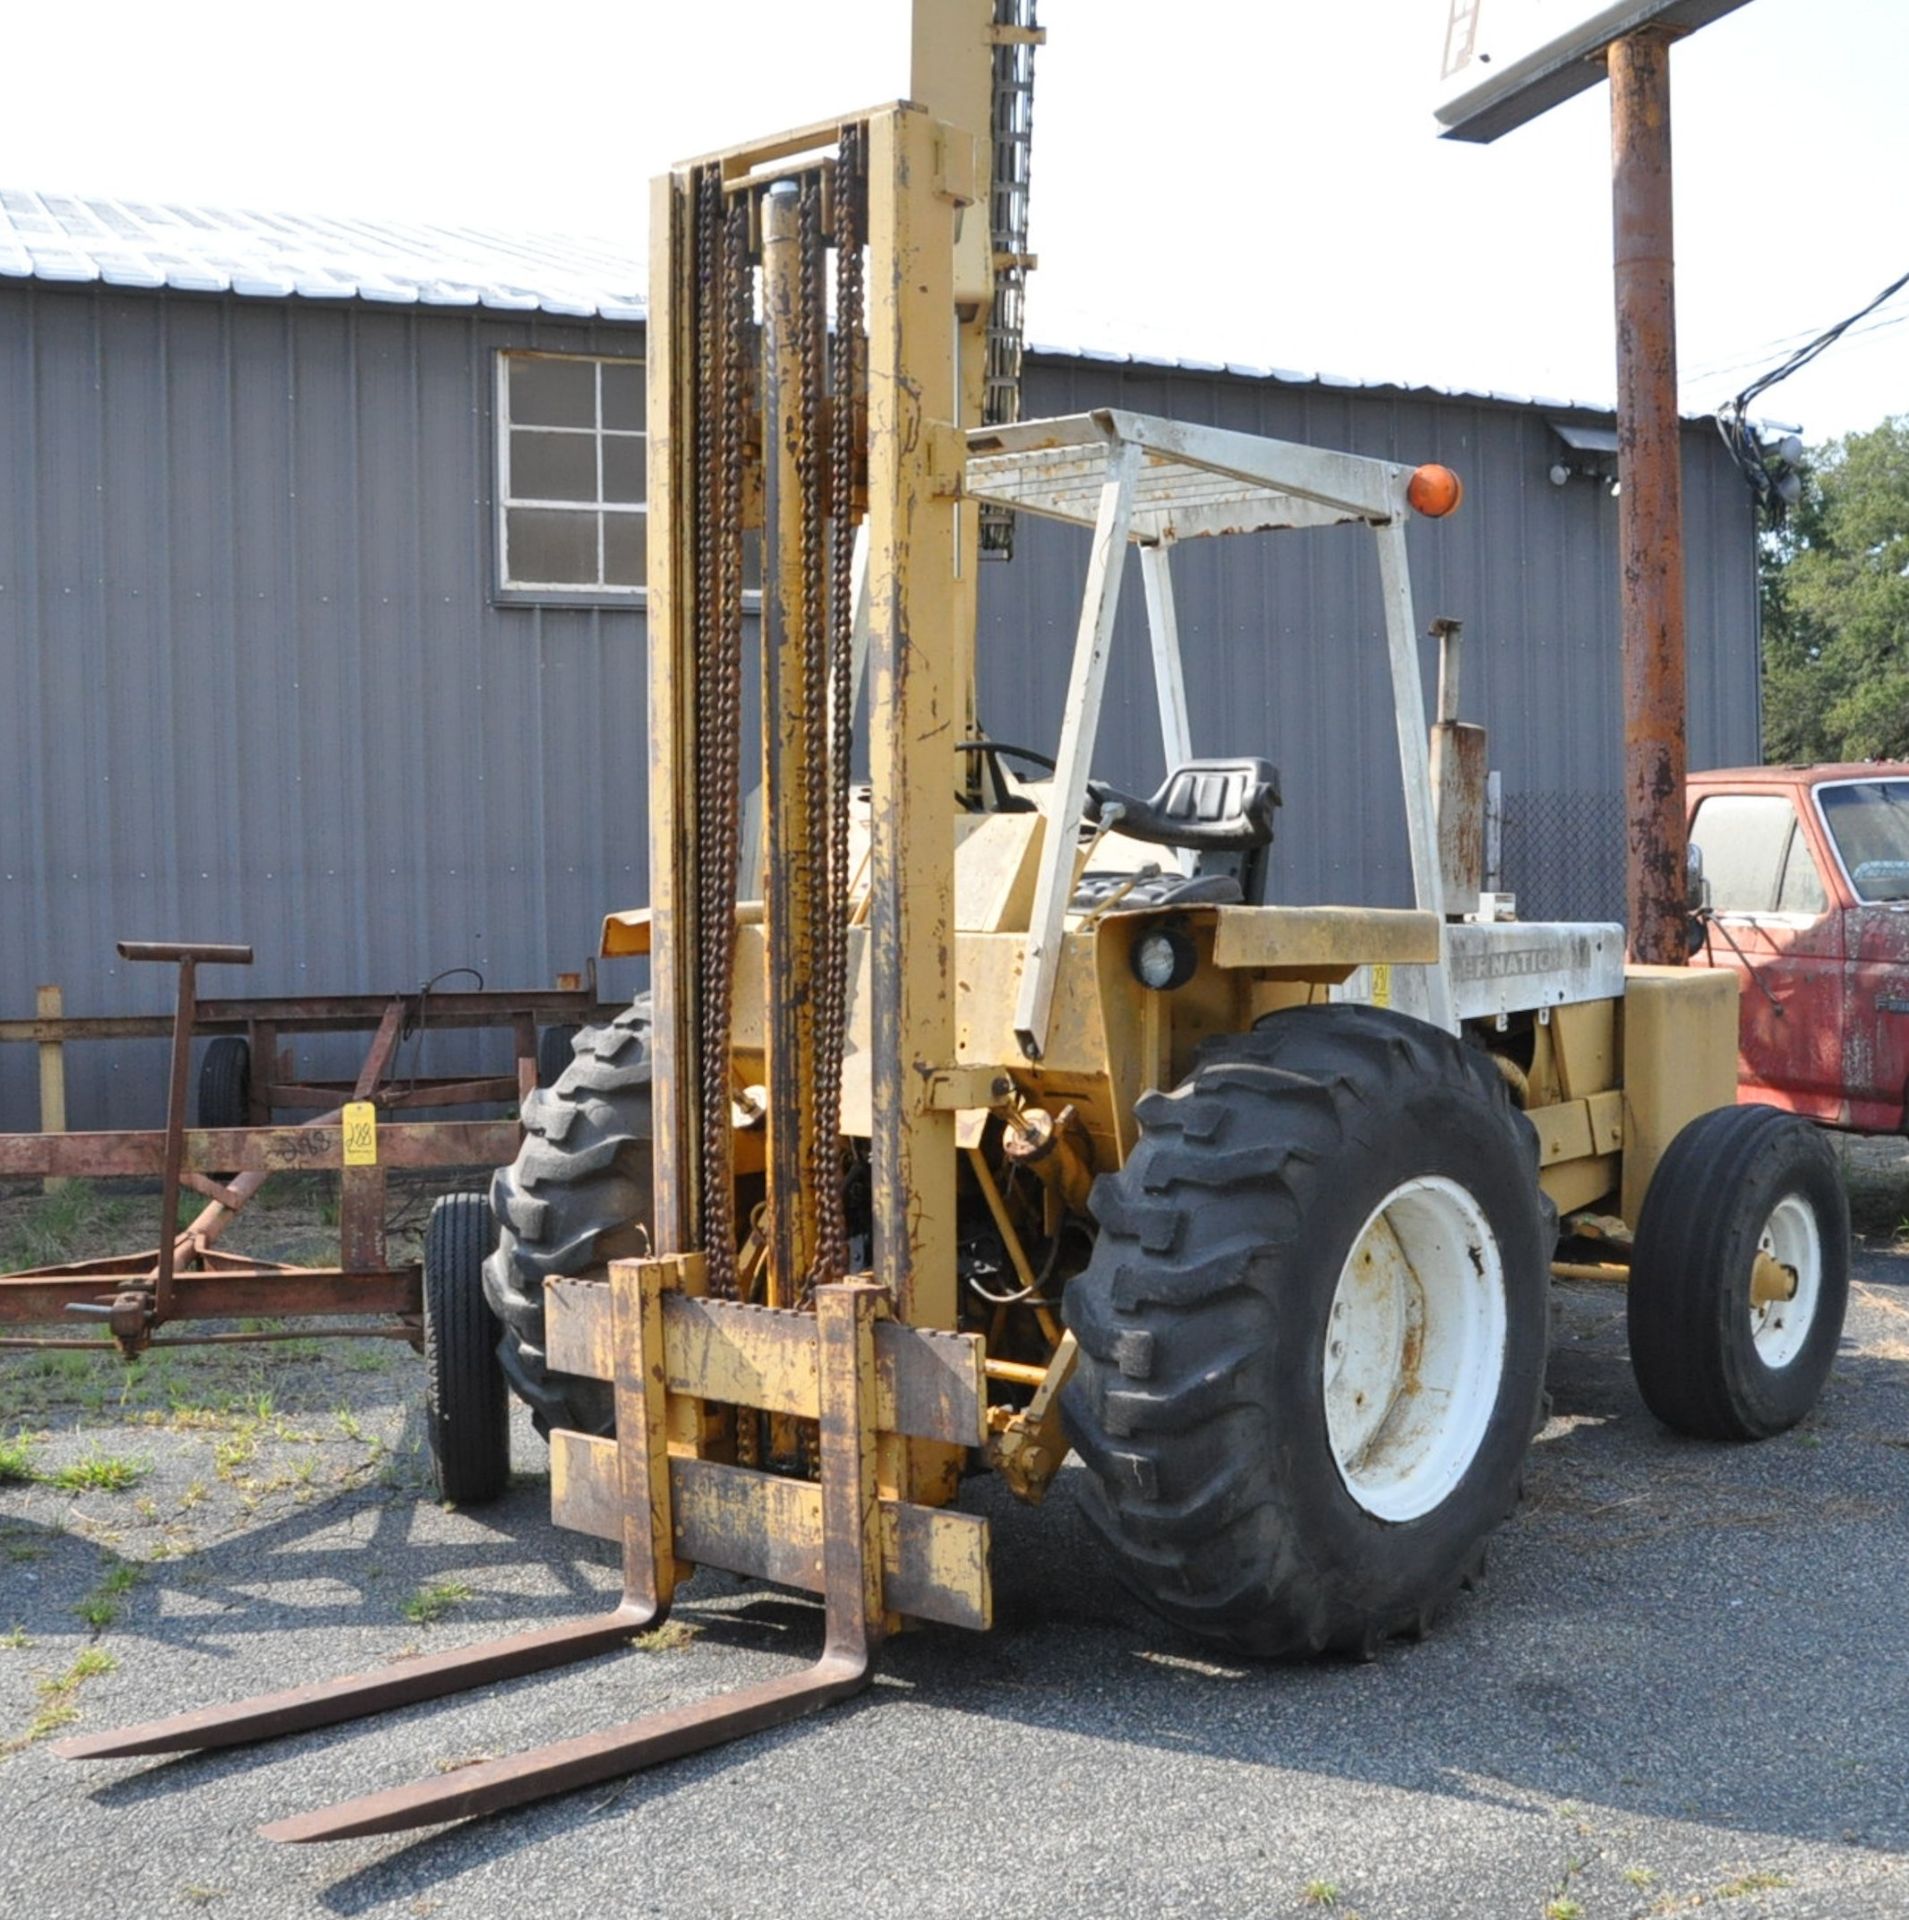 International Rough Terrain Fork Lift Truck, Approximately 96" Lift, Side Shift, 2-Stage Mast, 48"